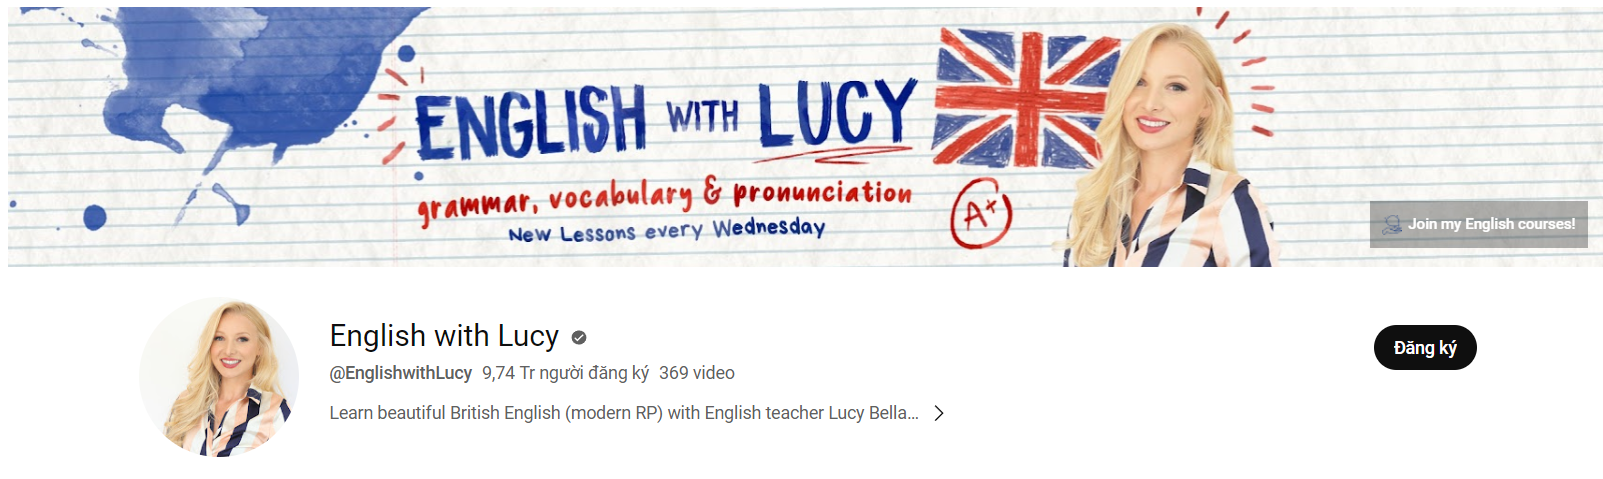 Học tiếng Anh cùng English with Lucy